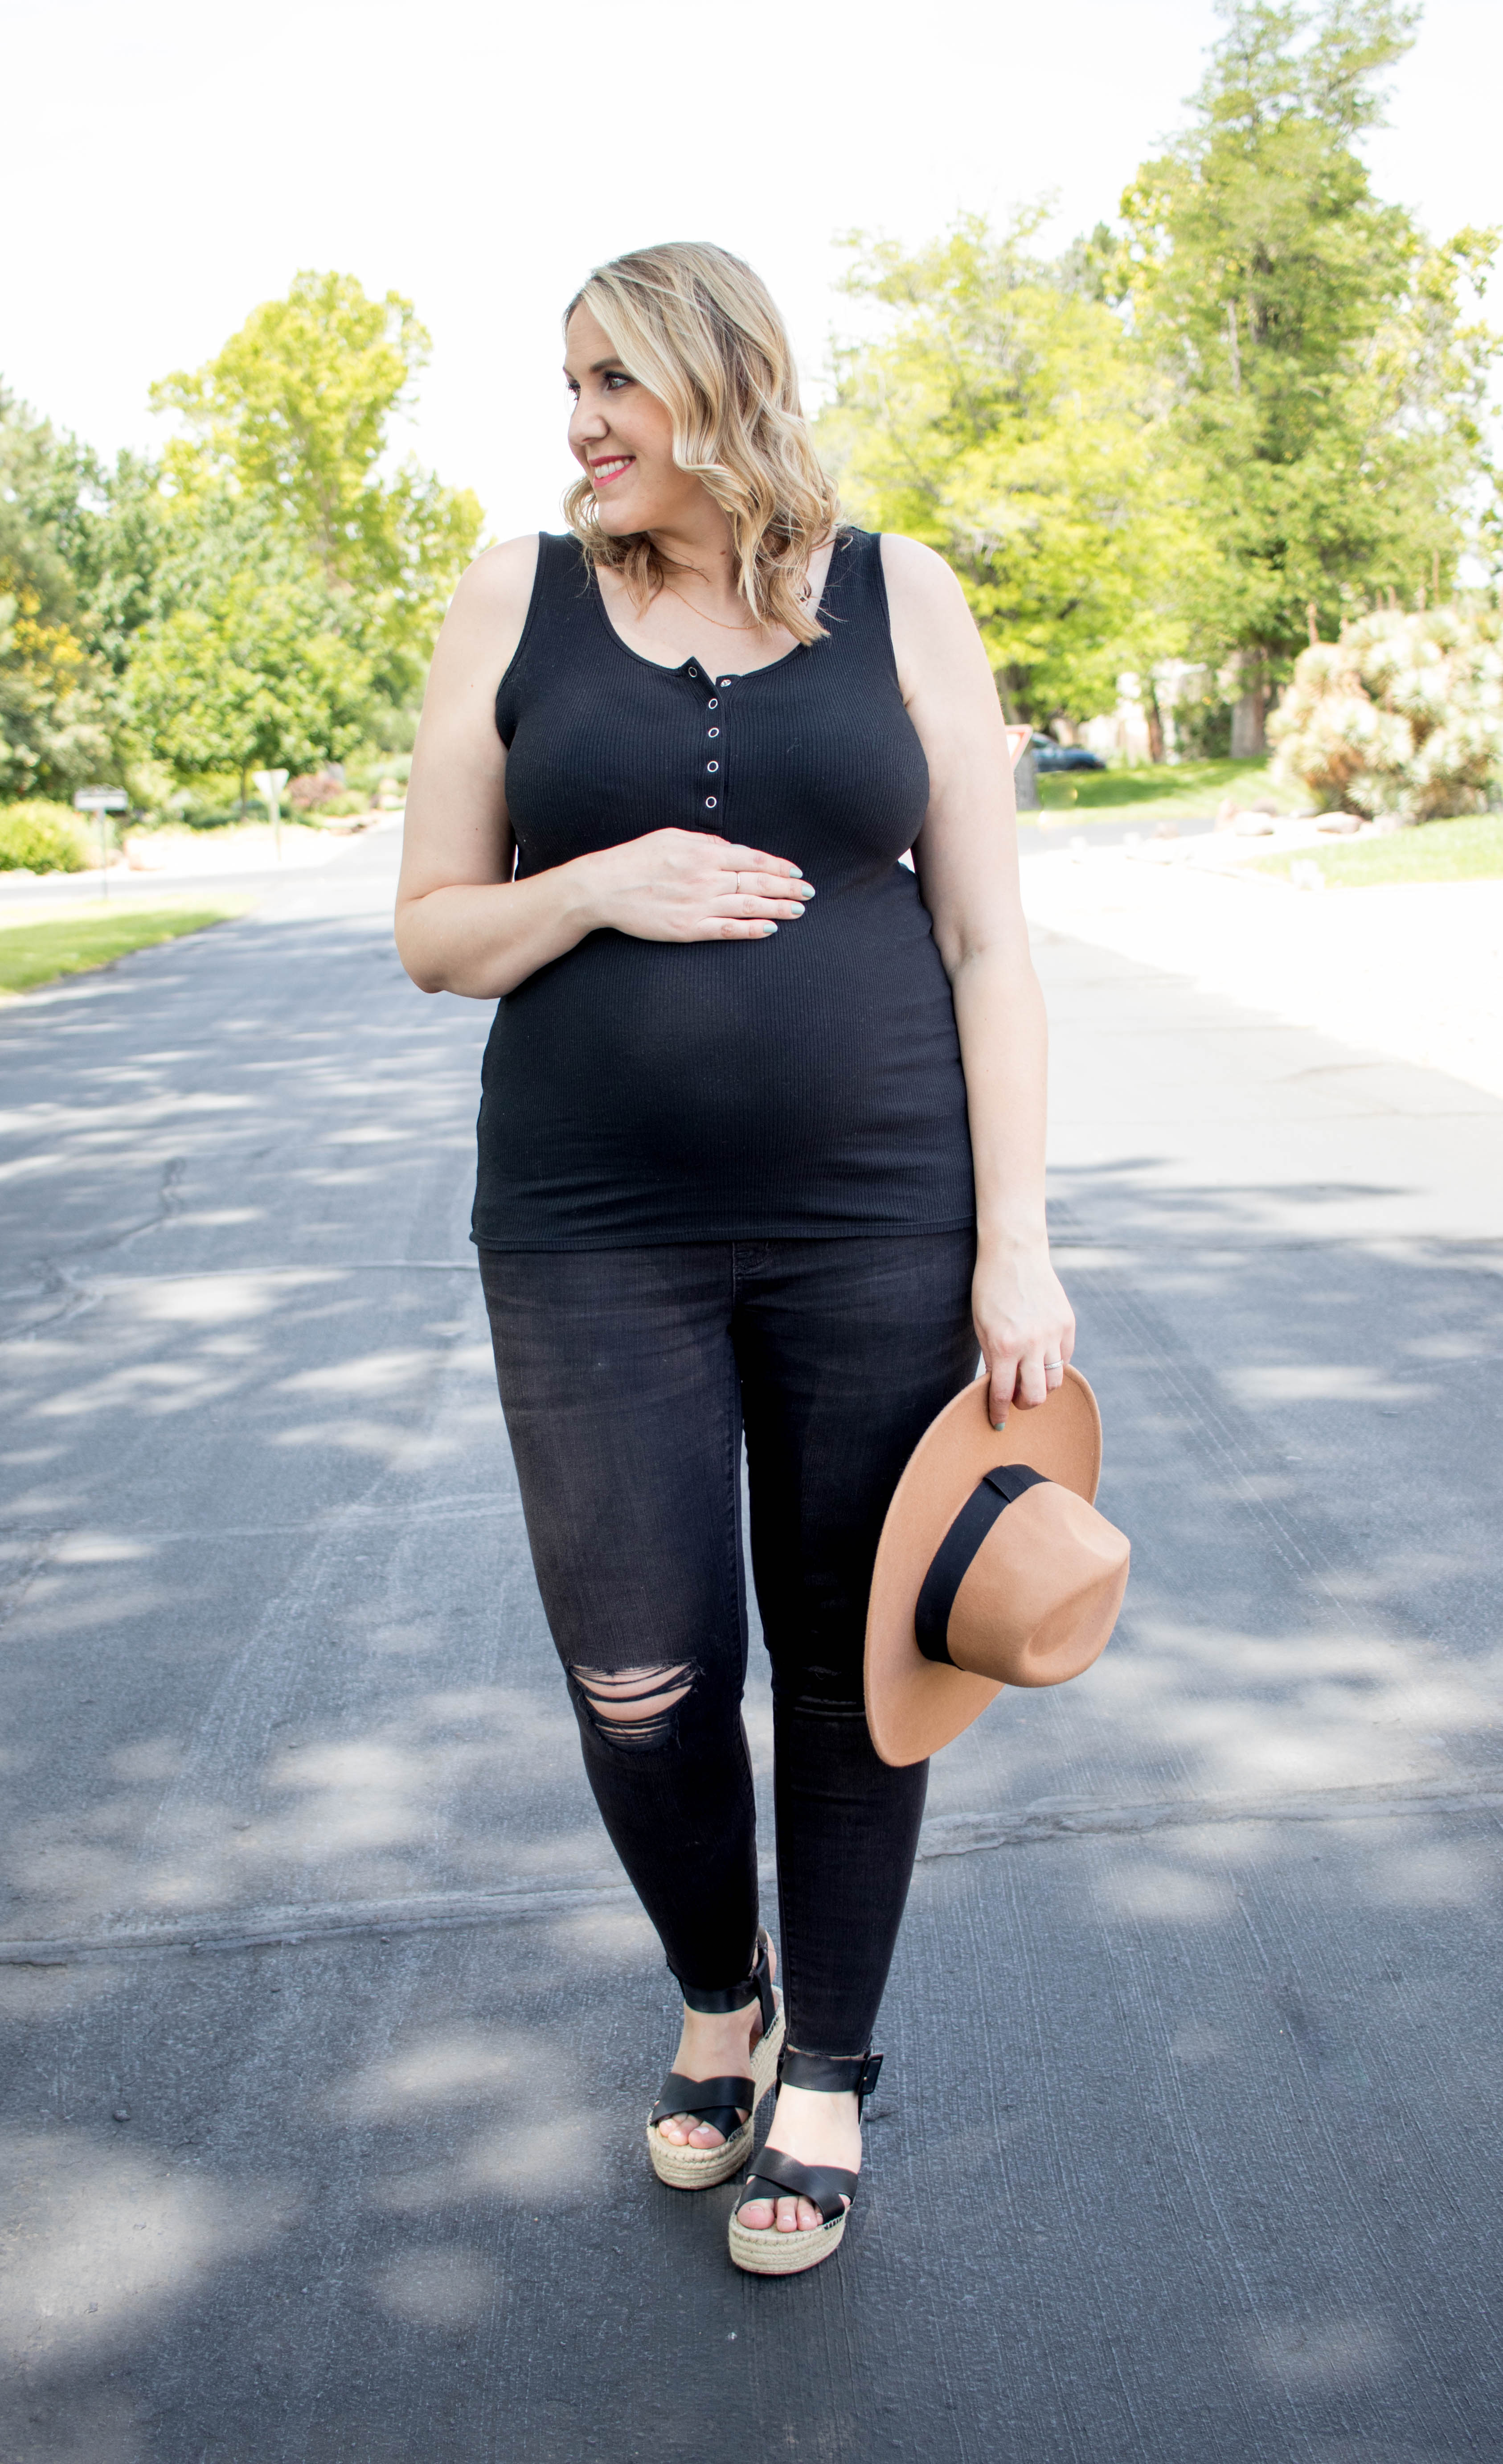 bump style black distressed maternity jeans #madewell #maternity #bumpstyle